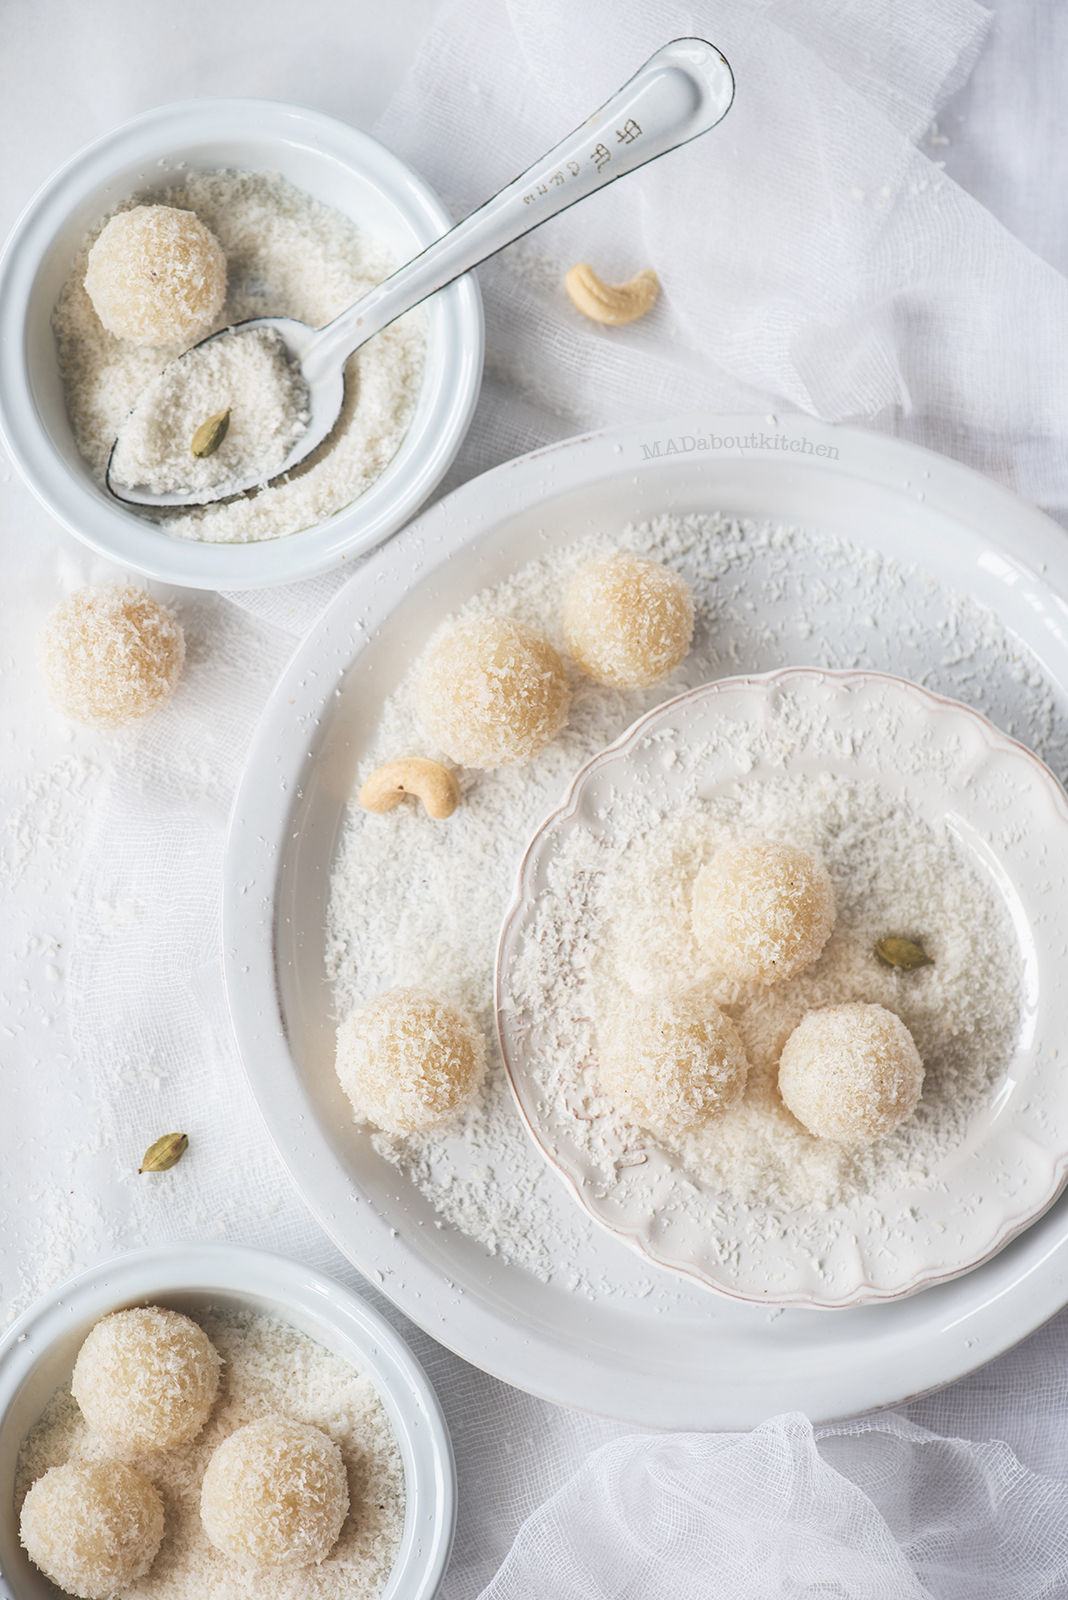 Coconut laddoo is soft laddoo made using fresh or desiccated coconut which is super simple to make and can be made using either sugar or condensed milk.